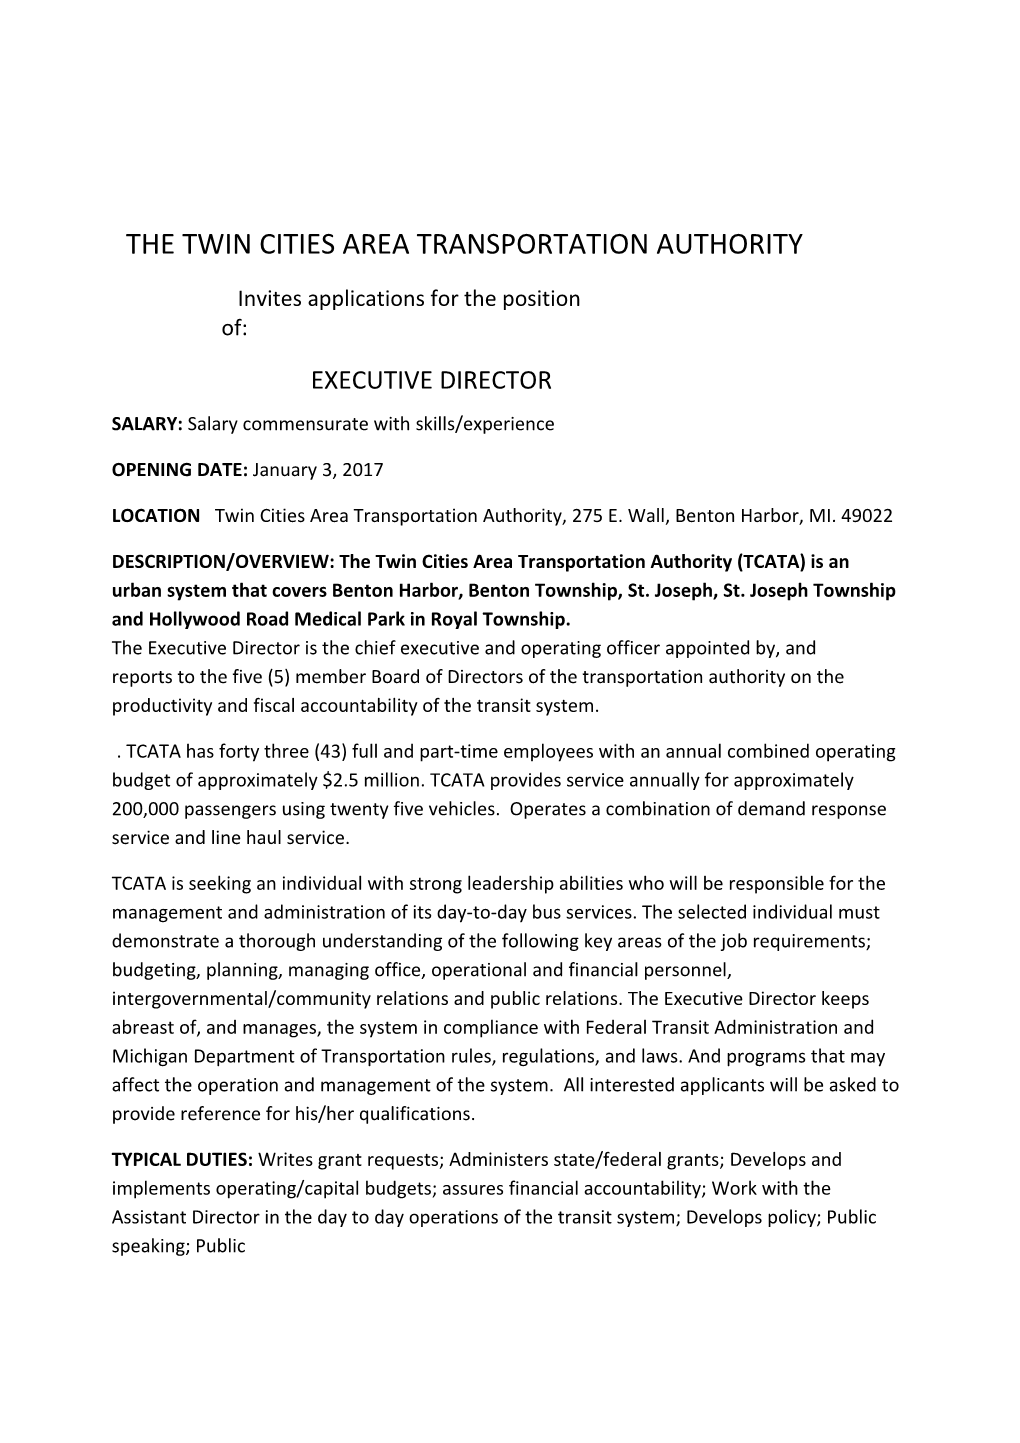 The Twin Cities Area Transportation Authority